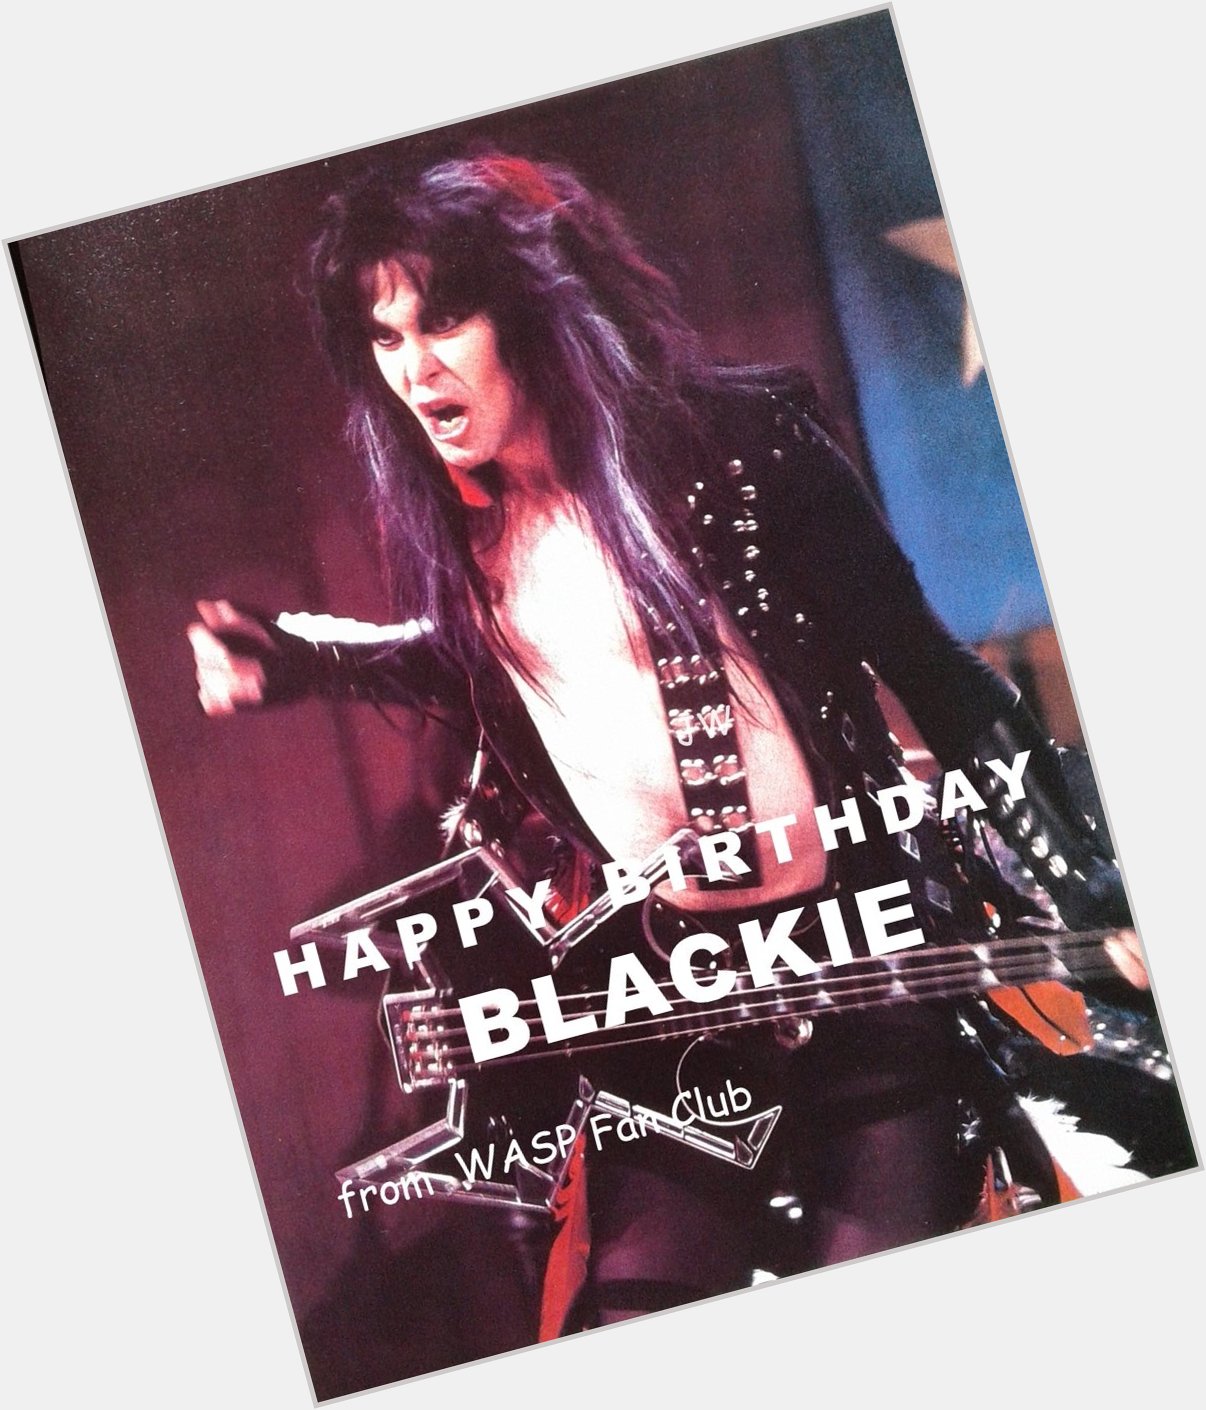 WISHING THE ONE AND ONLY BLACKIE LAWLESS OF W.A.S.P. HAPPY BIRTHDAY!!!   